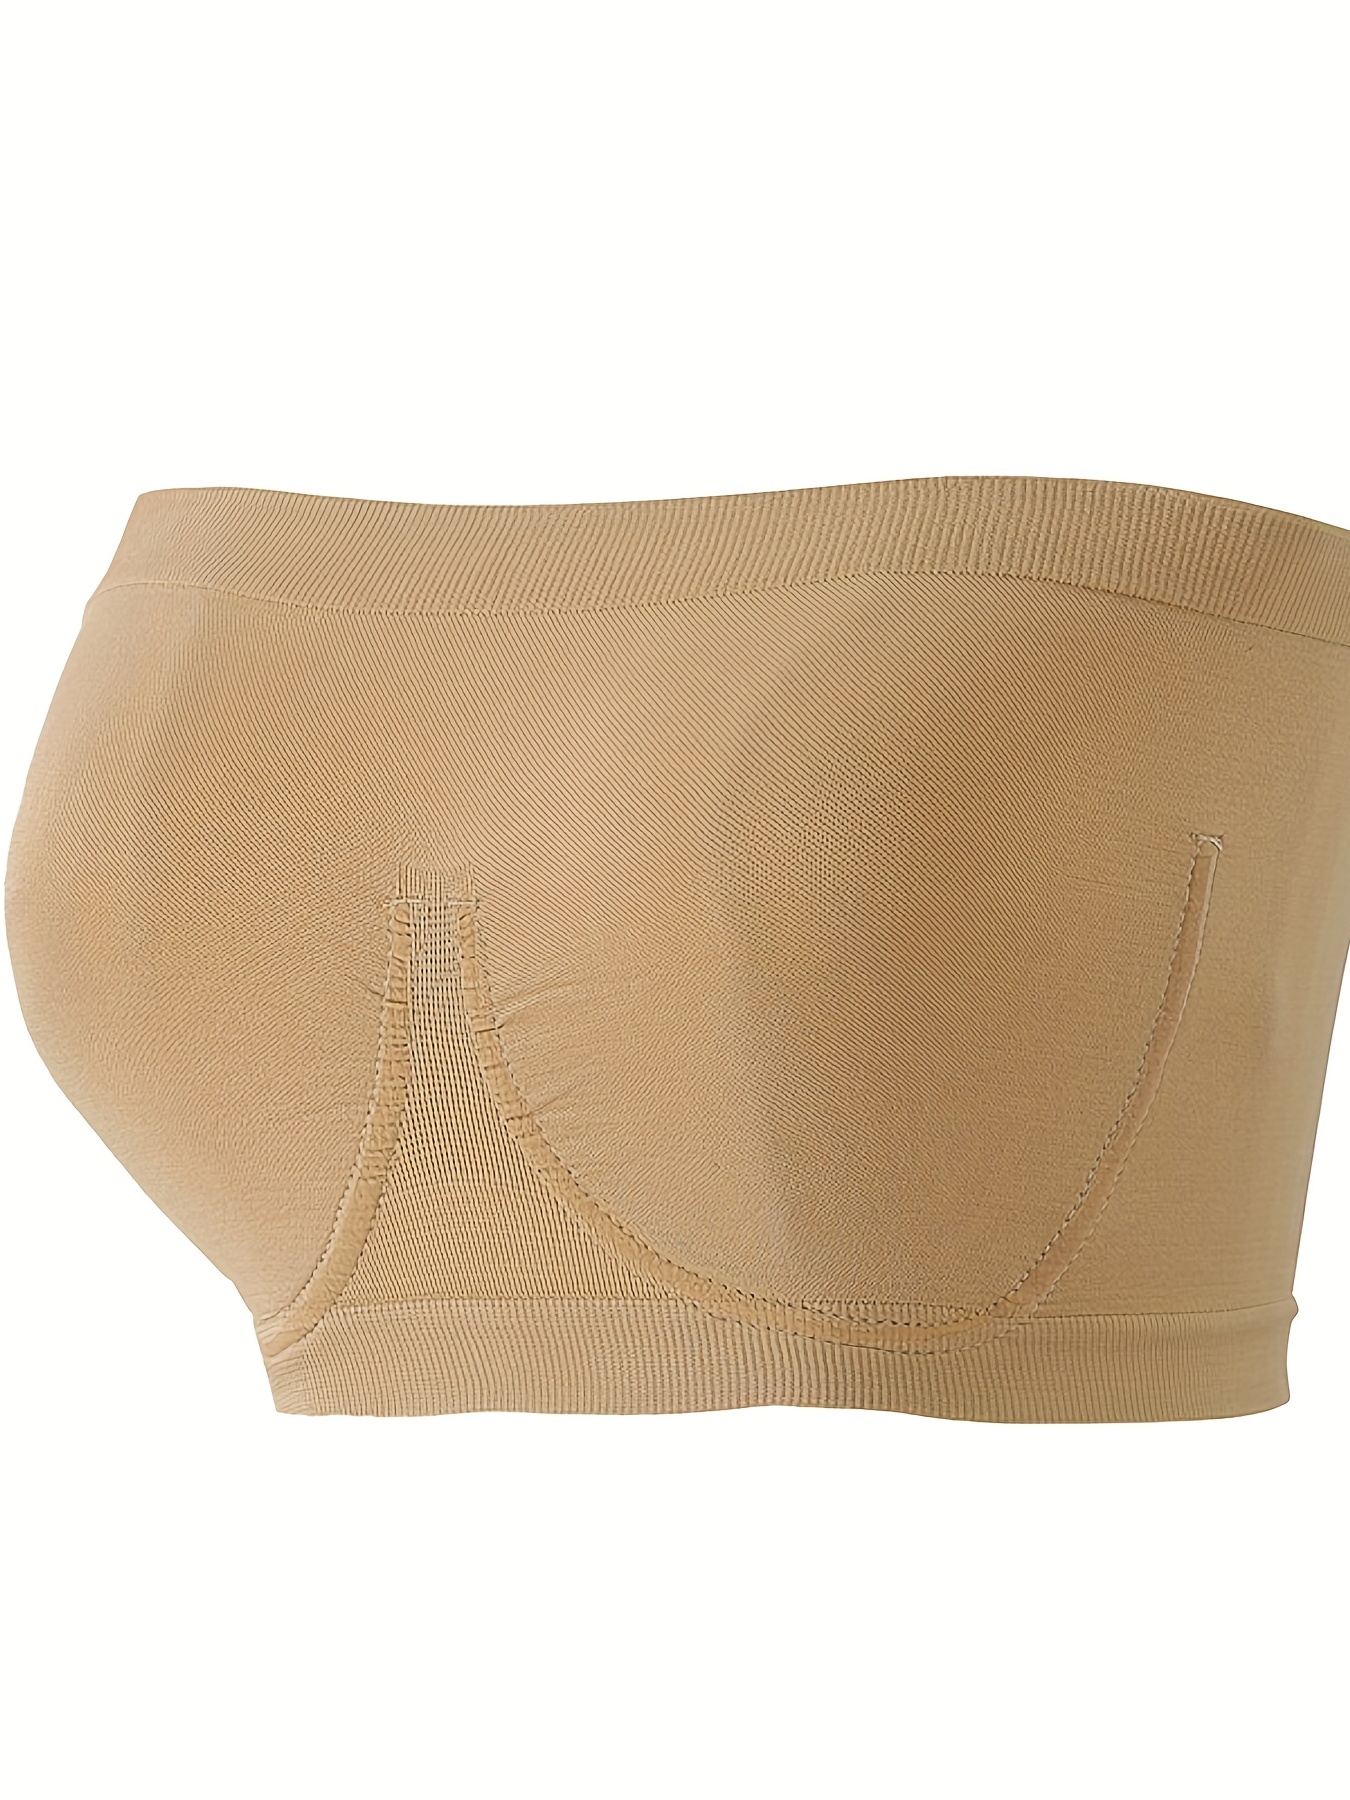 TQWQT Women's Strapless Bra Bandeau Tube Top Invisible Bra for Small Chests  Seamless Wireless Solid Bra Fitness Bras Underwear,Beige S